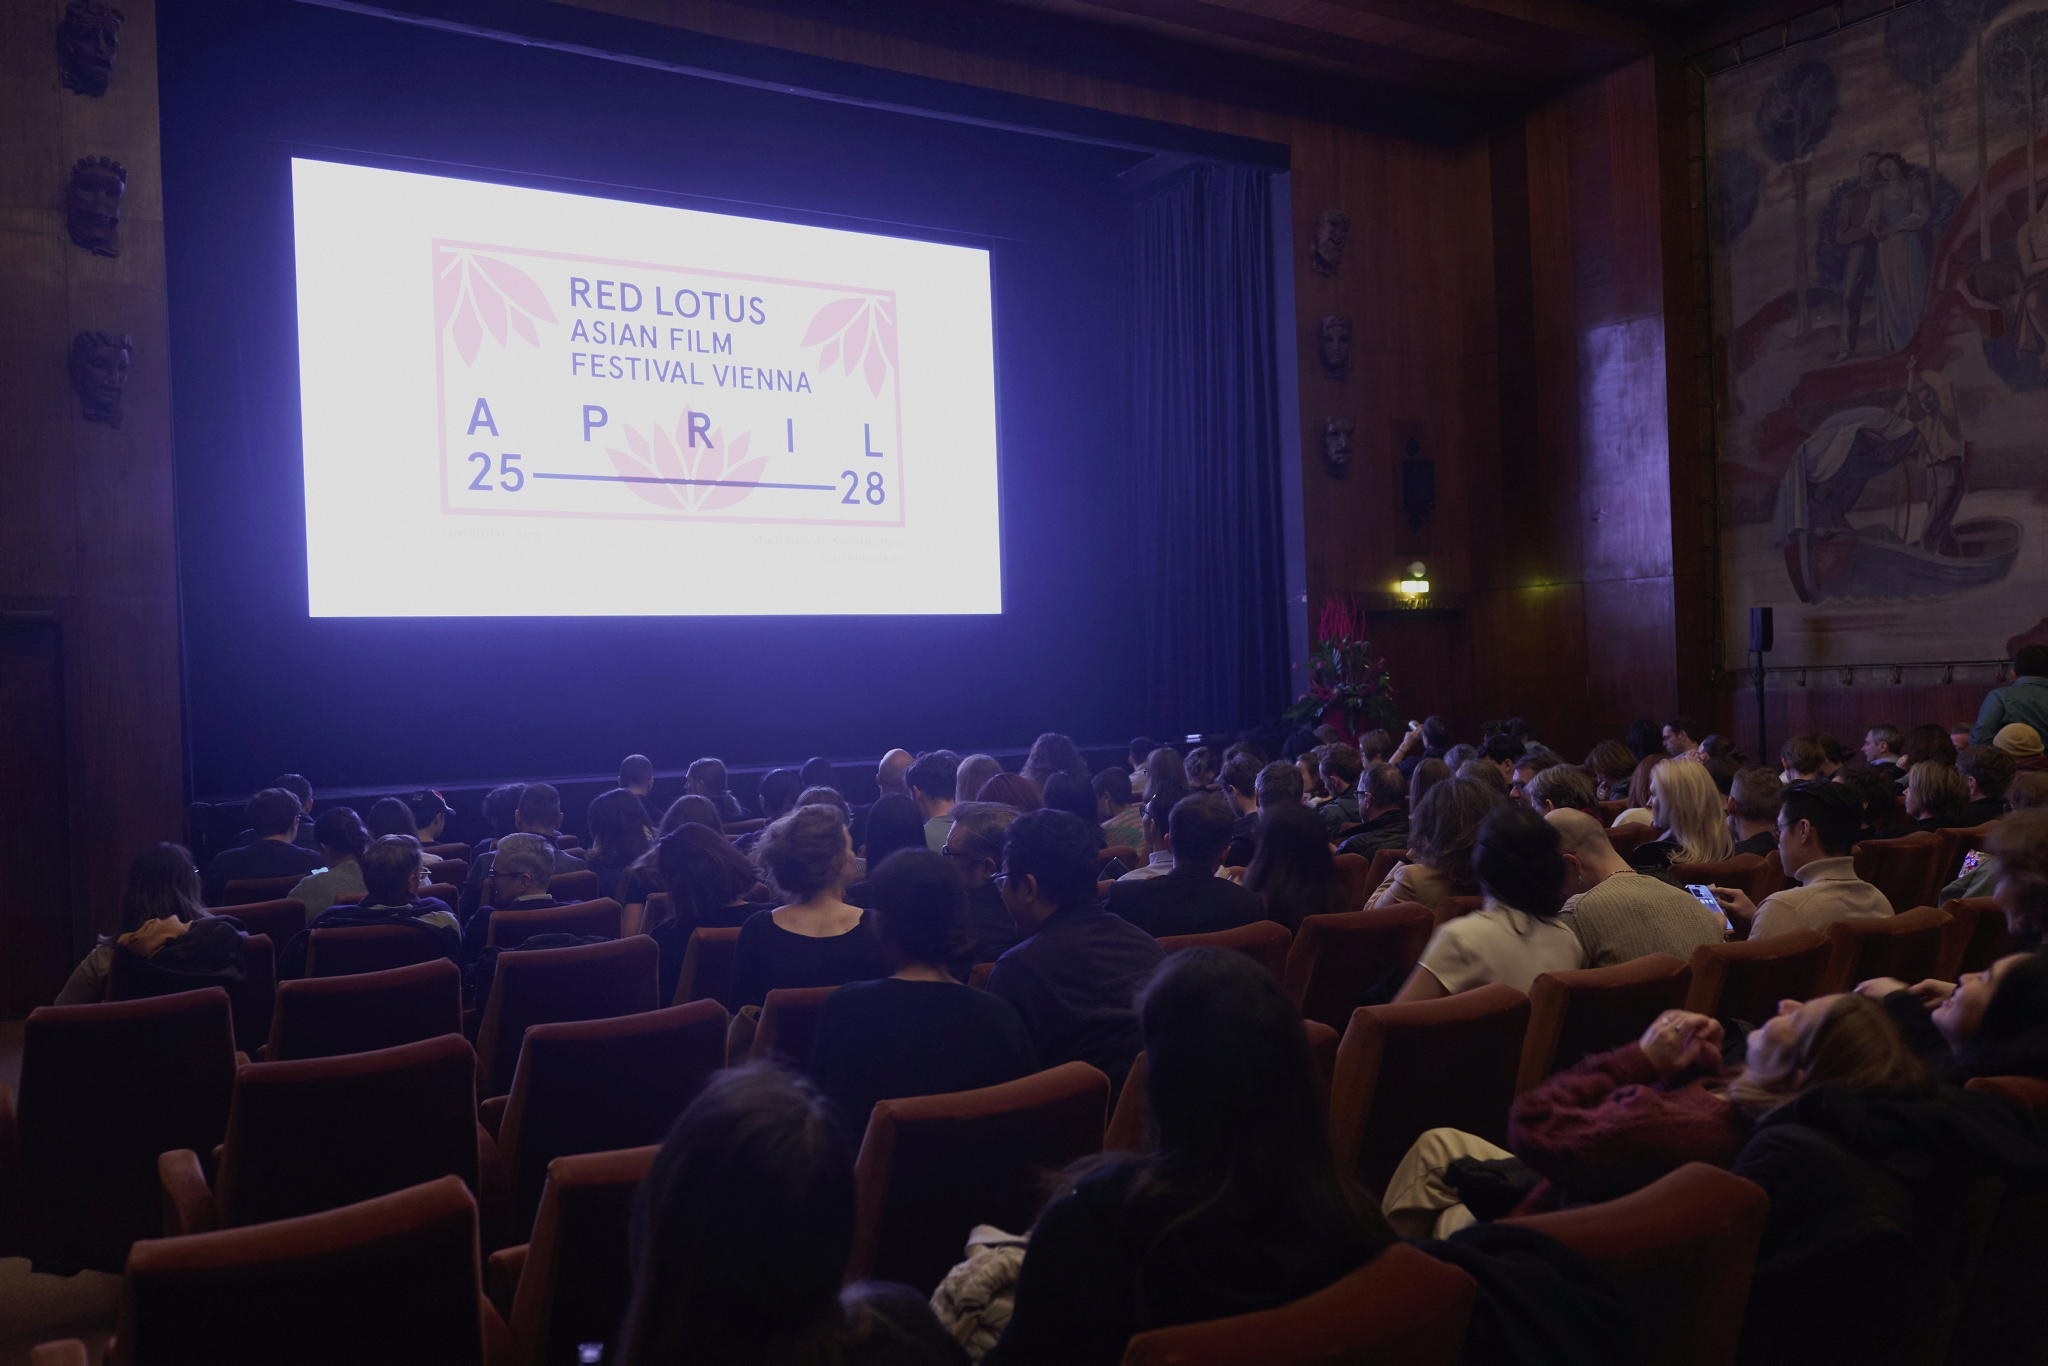 The Hong Kong Economic and Trade Office, Berlin supported the screening of two Hong Kong films at the third edition of the Red Lotus Asian Film Festival, which took place from April 25 to 28 (Vienna time) in Vienna. Photo shows the audience at the opening screening of the HONG KONG PROGRAMME in Vienna on April 26.